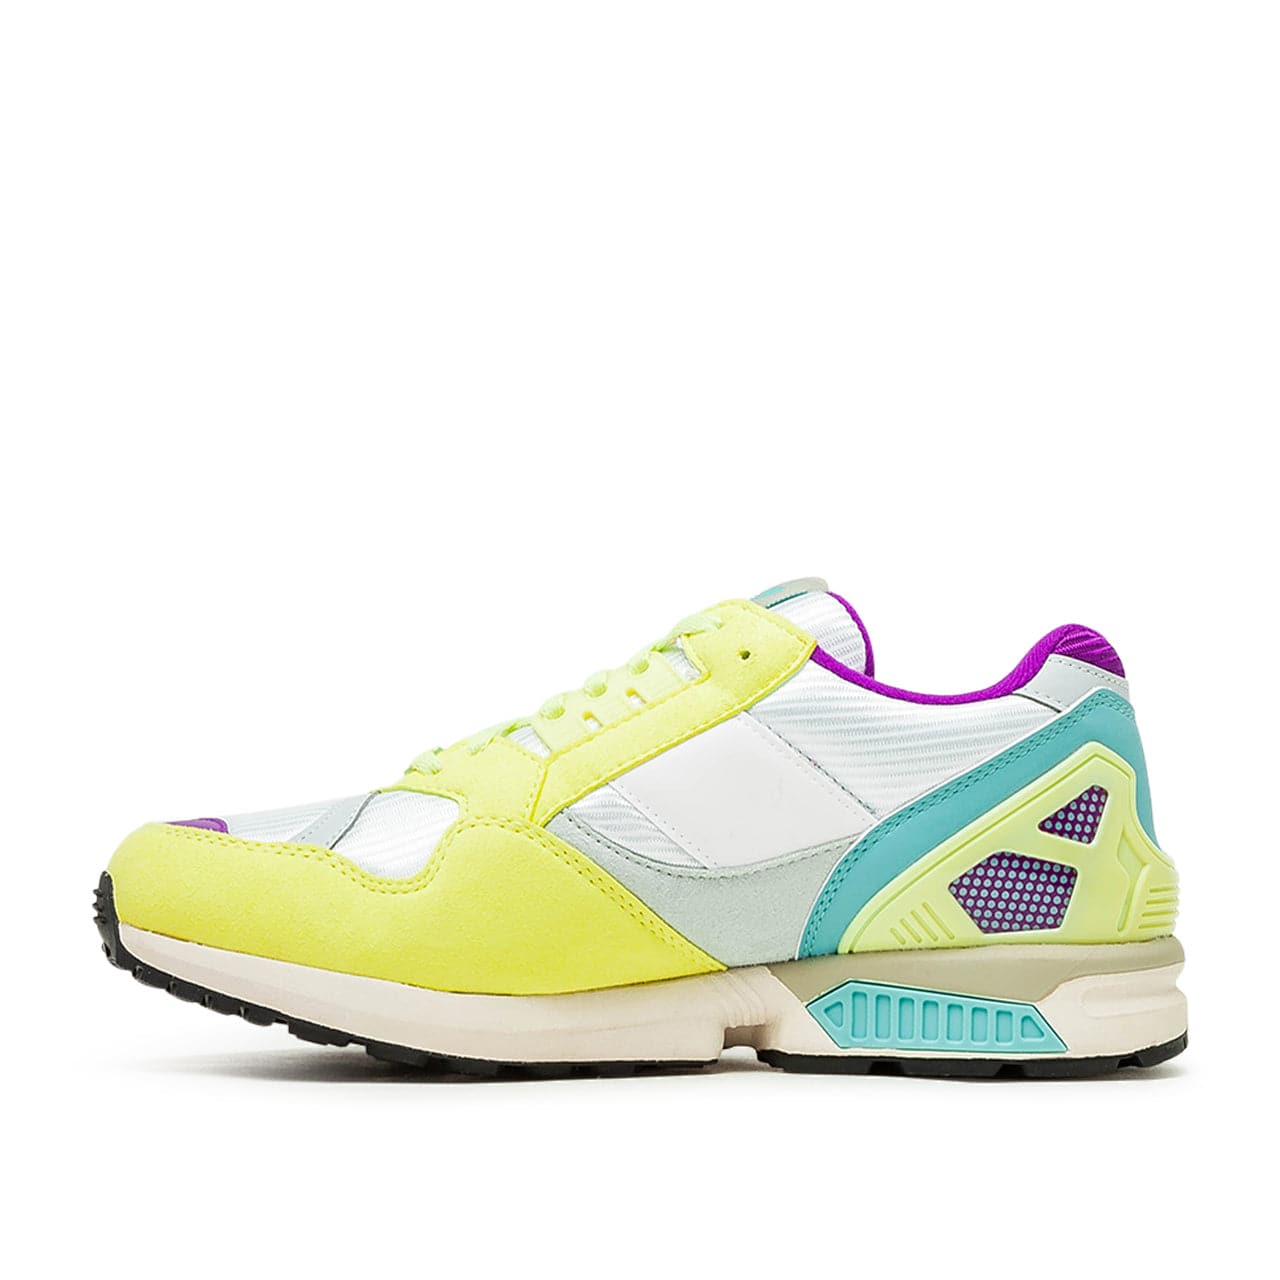 adidas ZX 9000 Citrus 'Bring Back Pack' (Yellow / Green / Purple)